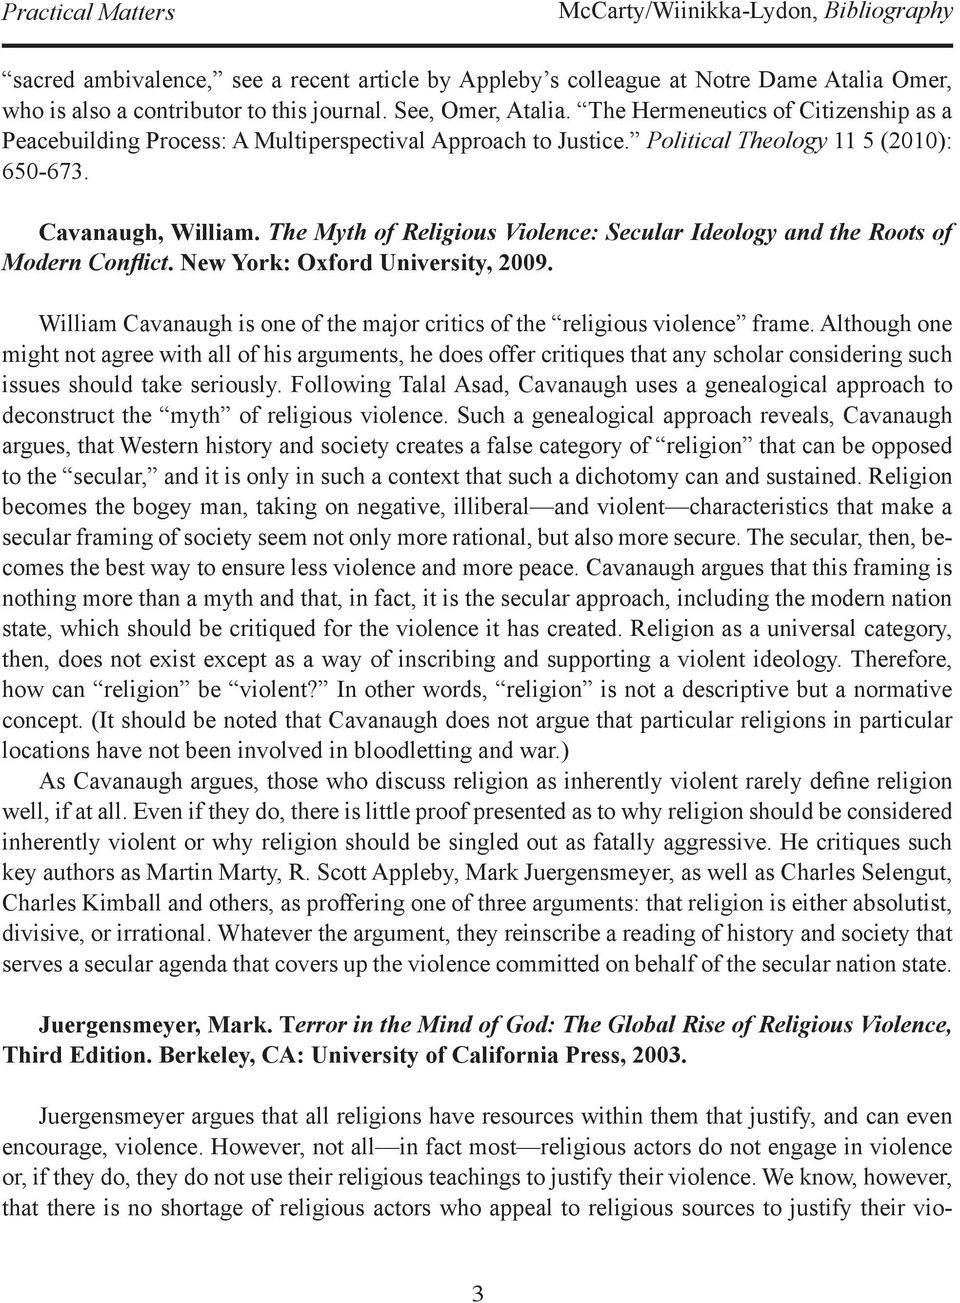 The Myth of Religious Violence: Secular Ideology and the Roots of Modern Conflict. New York: Oxford University, 2009. William Cavanaugh is one of the major critics of the religious violence frame.